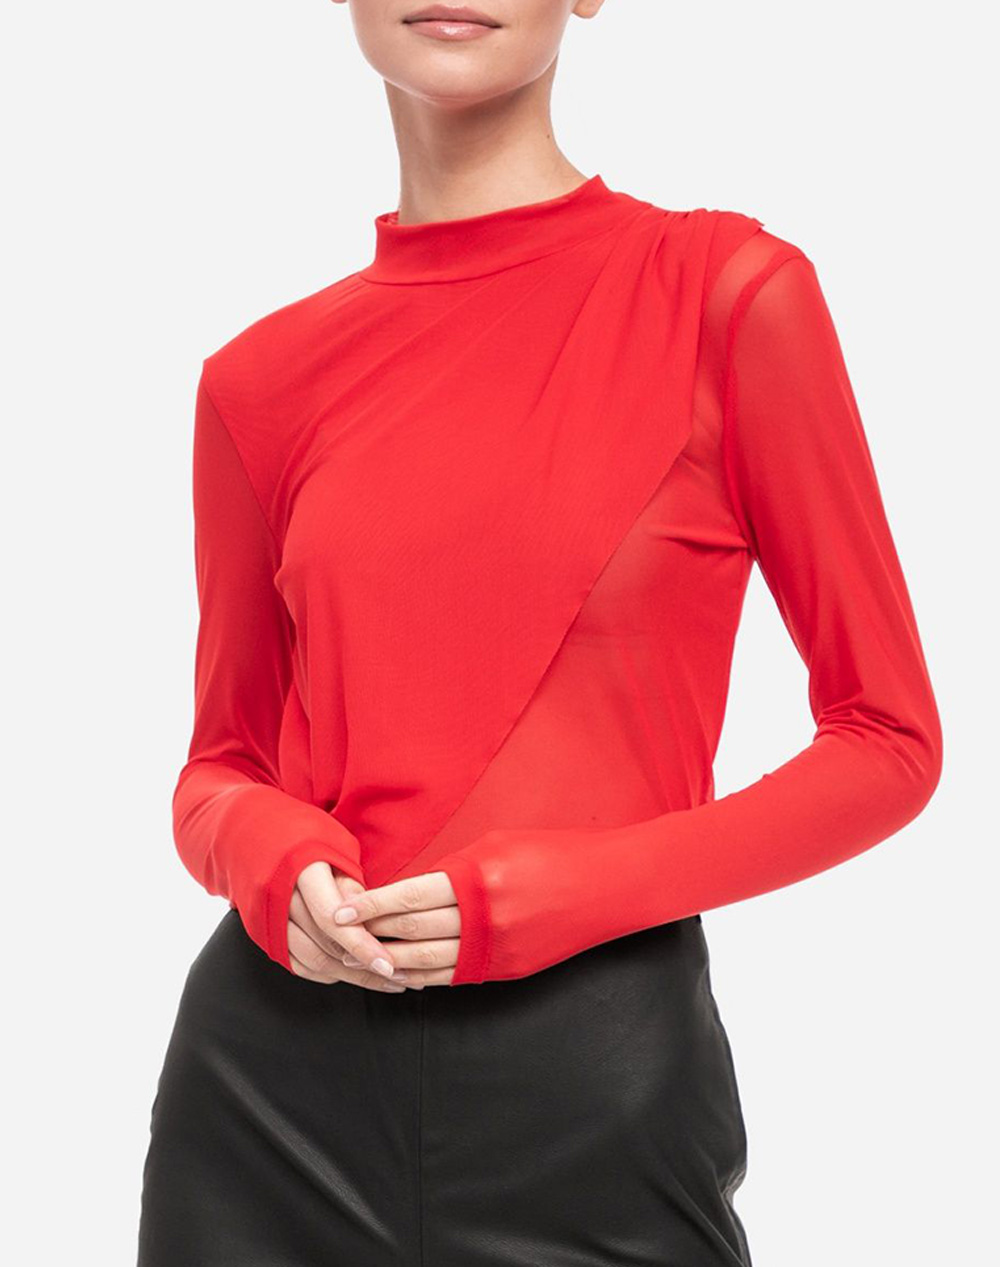 NA-KD 10 EXTRA LAYER MESH TOP ΓΥΝΑΙΚΕΙΟ 1017-000738-RED Red